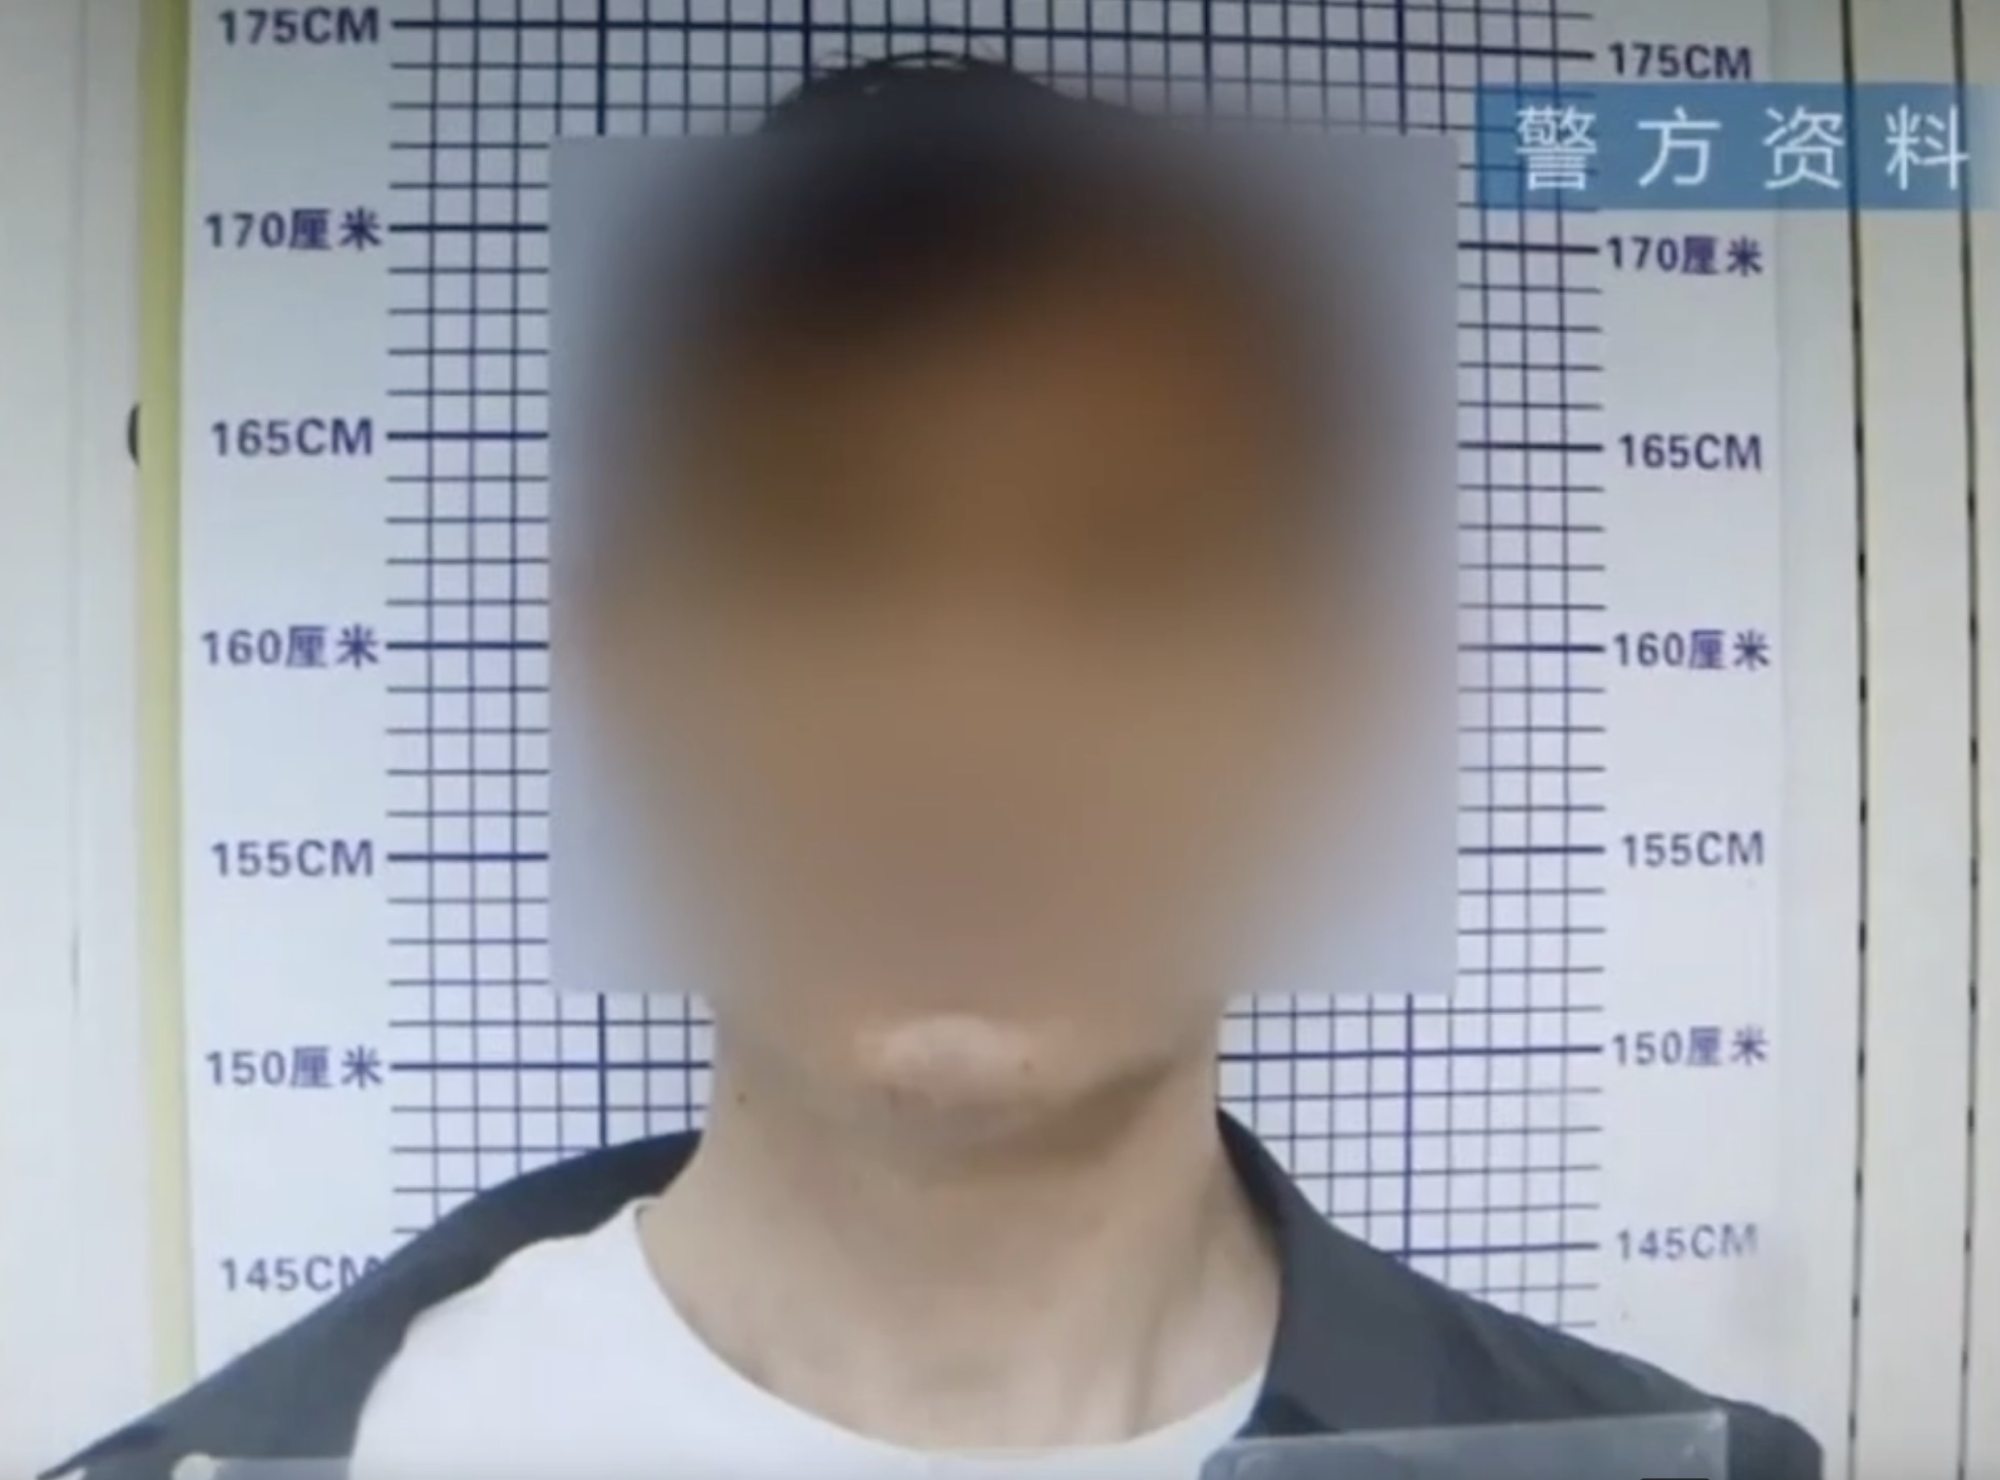 The love scams Nie set up were elaborate and ran across five years as he gained the trust of his victims before they handed over large sums of money. Photo: Anqing Public Security Bureau